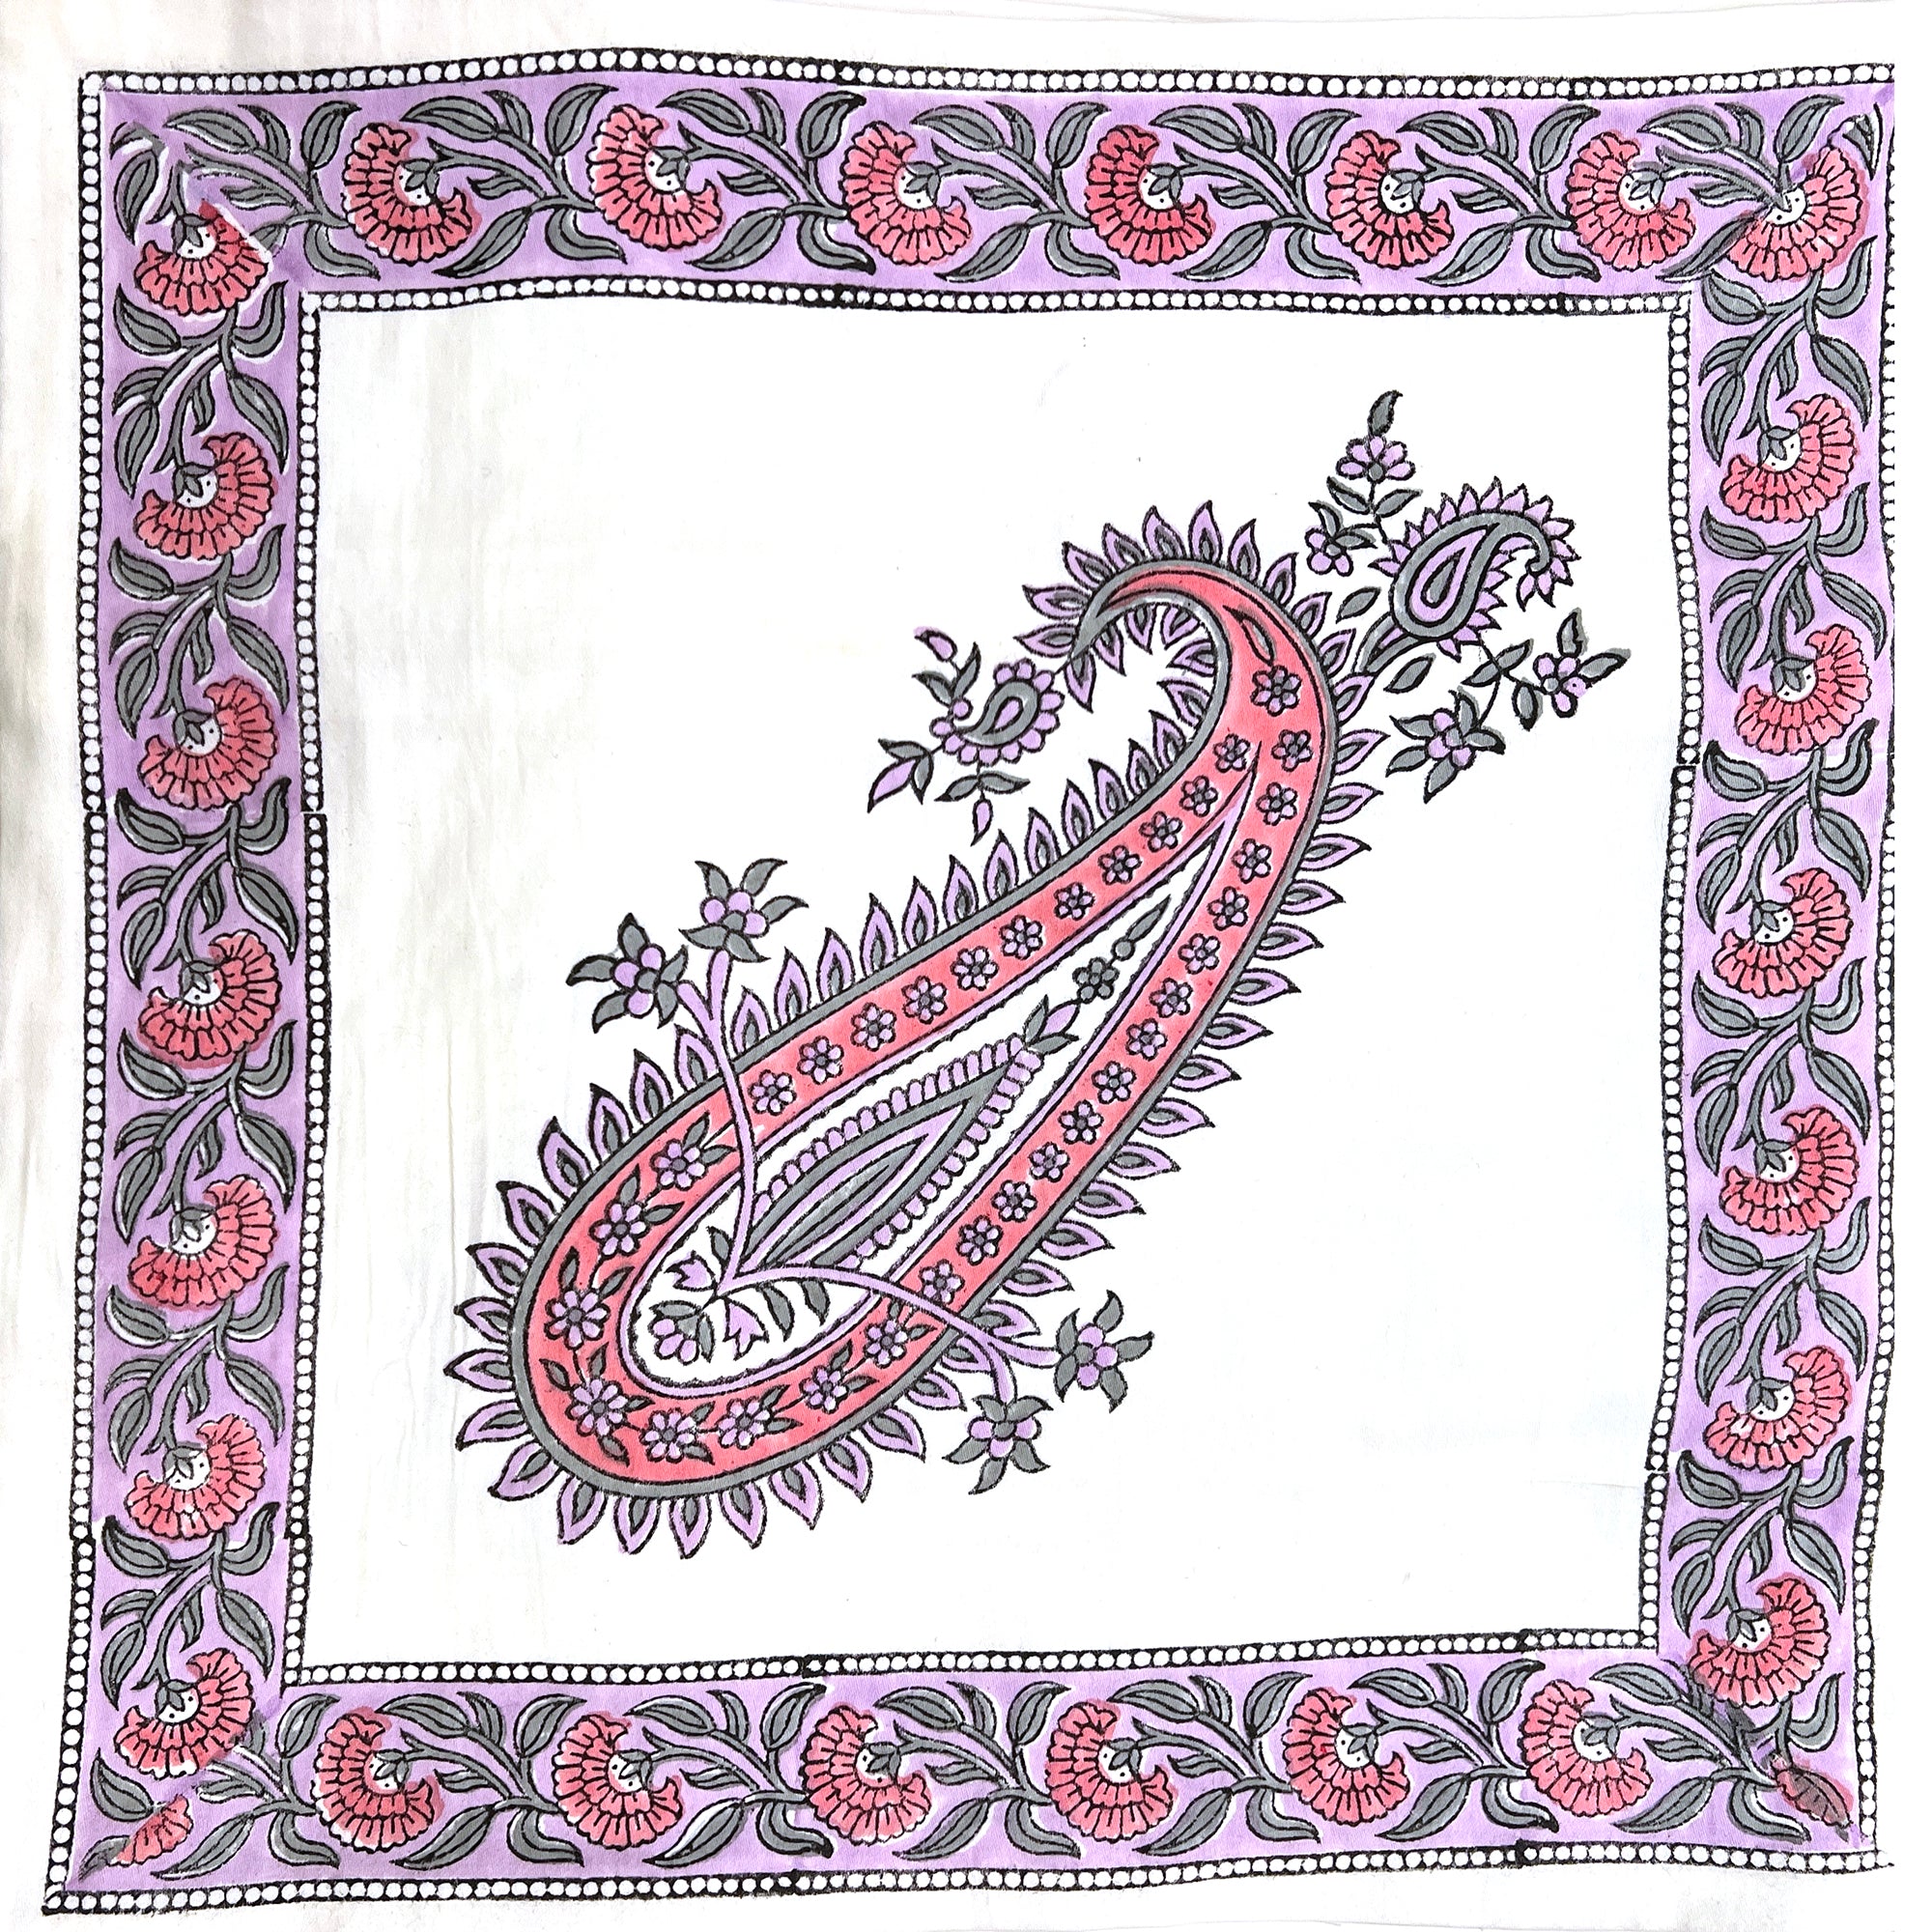 Paisley Block Print Pillow Cover - Vintage India NYC